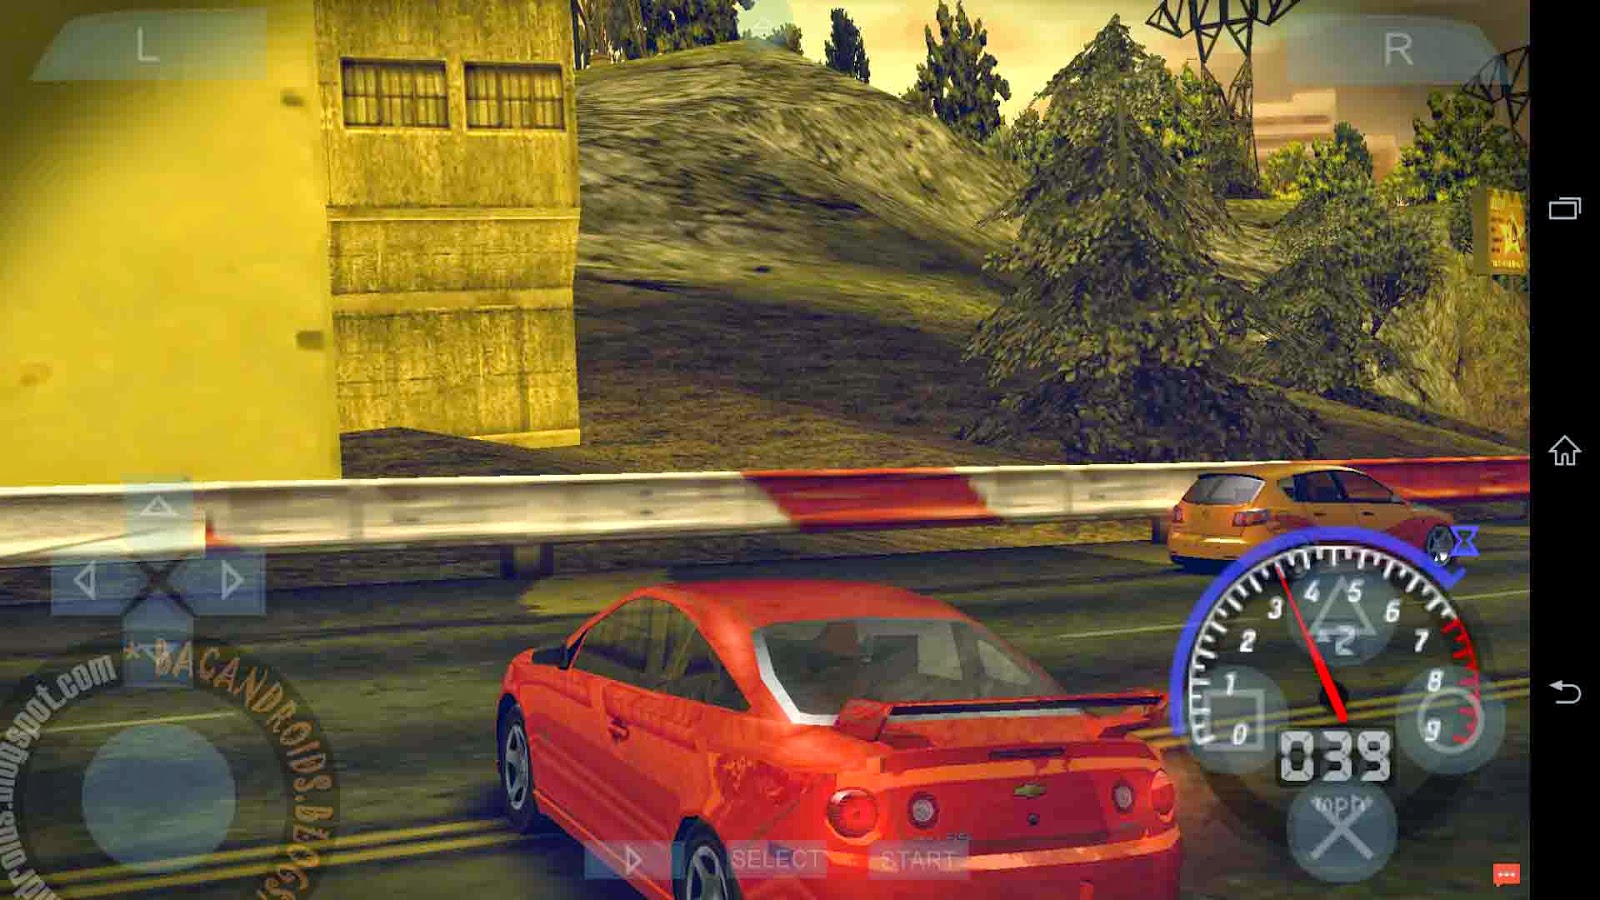 Link Download ROM game PSP iso Android NFS